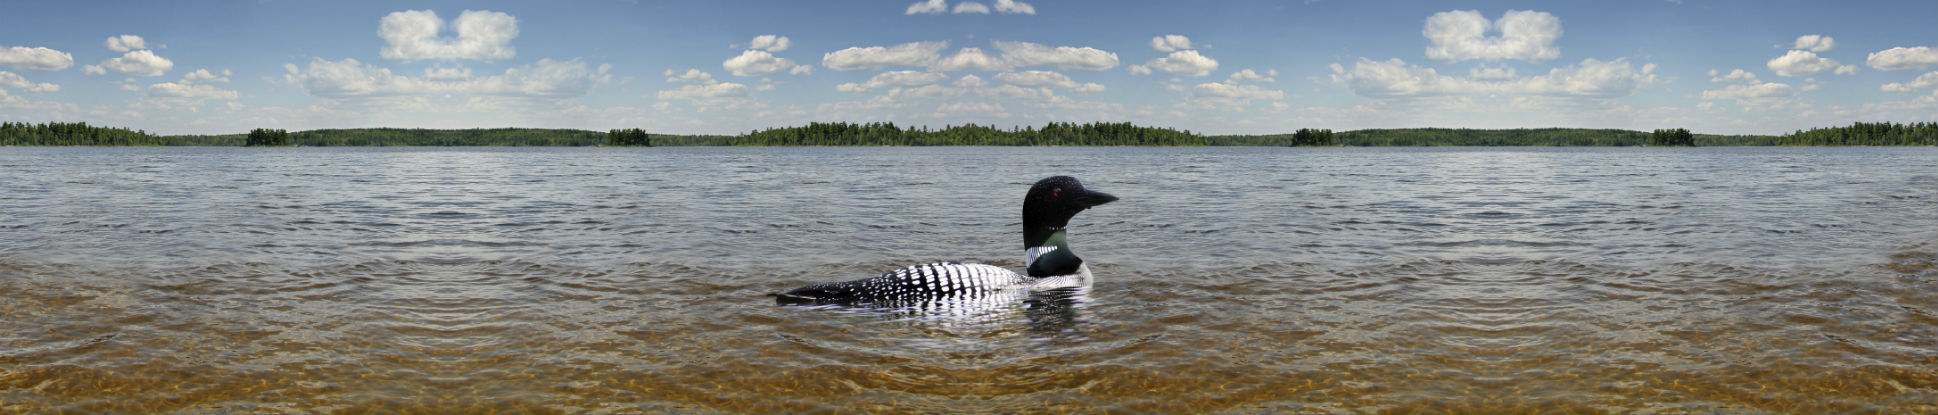 Image of a common loon